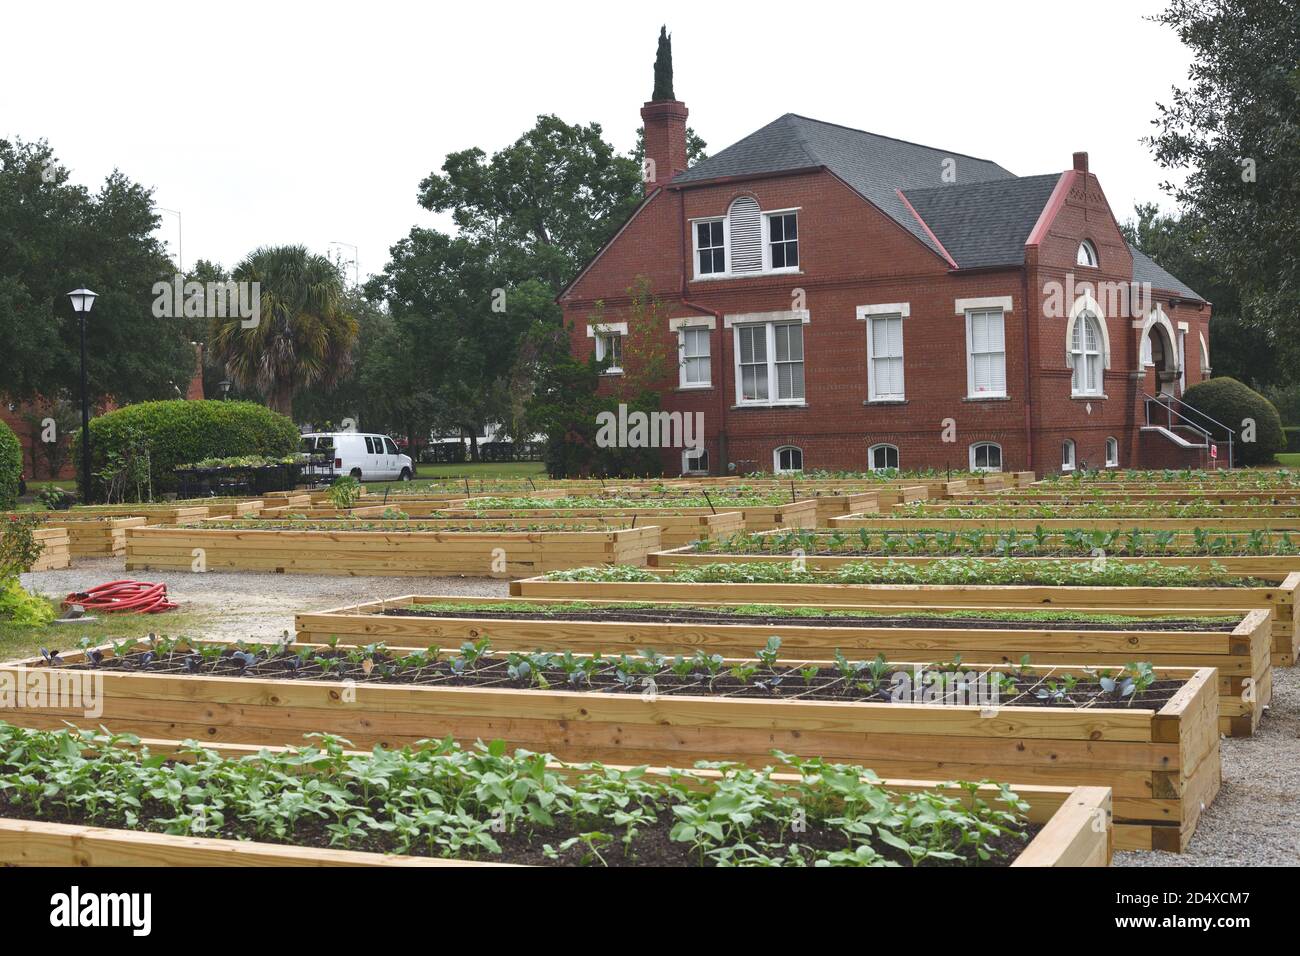 Urban Gardens as a 19th Century English Village with Soil Plots Set Against English Street Names and Red Brick Architecture with New Plants Growing. Stock Photo